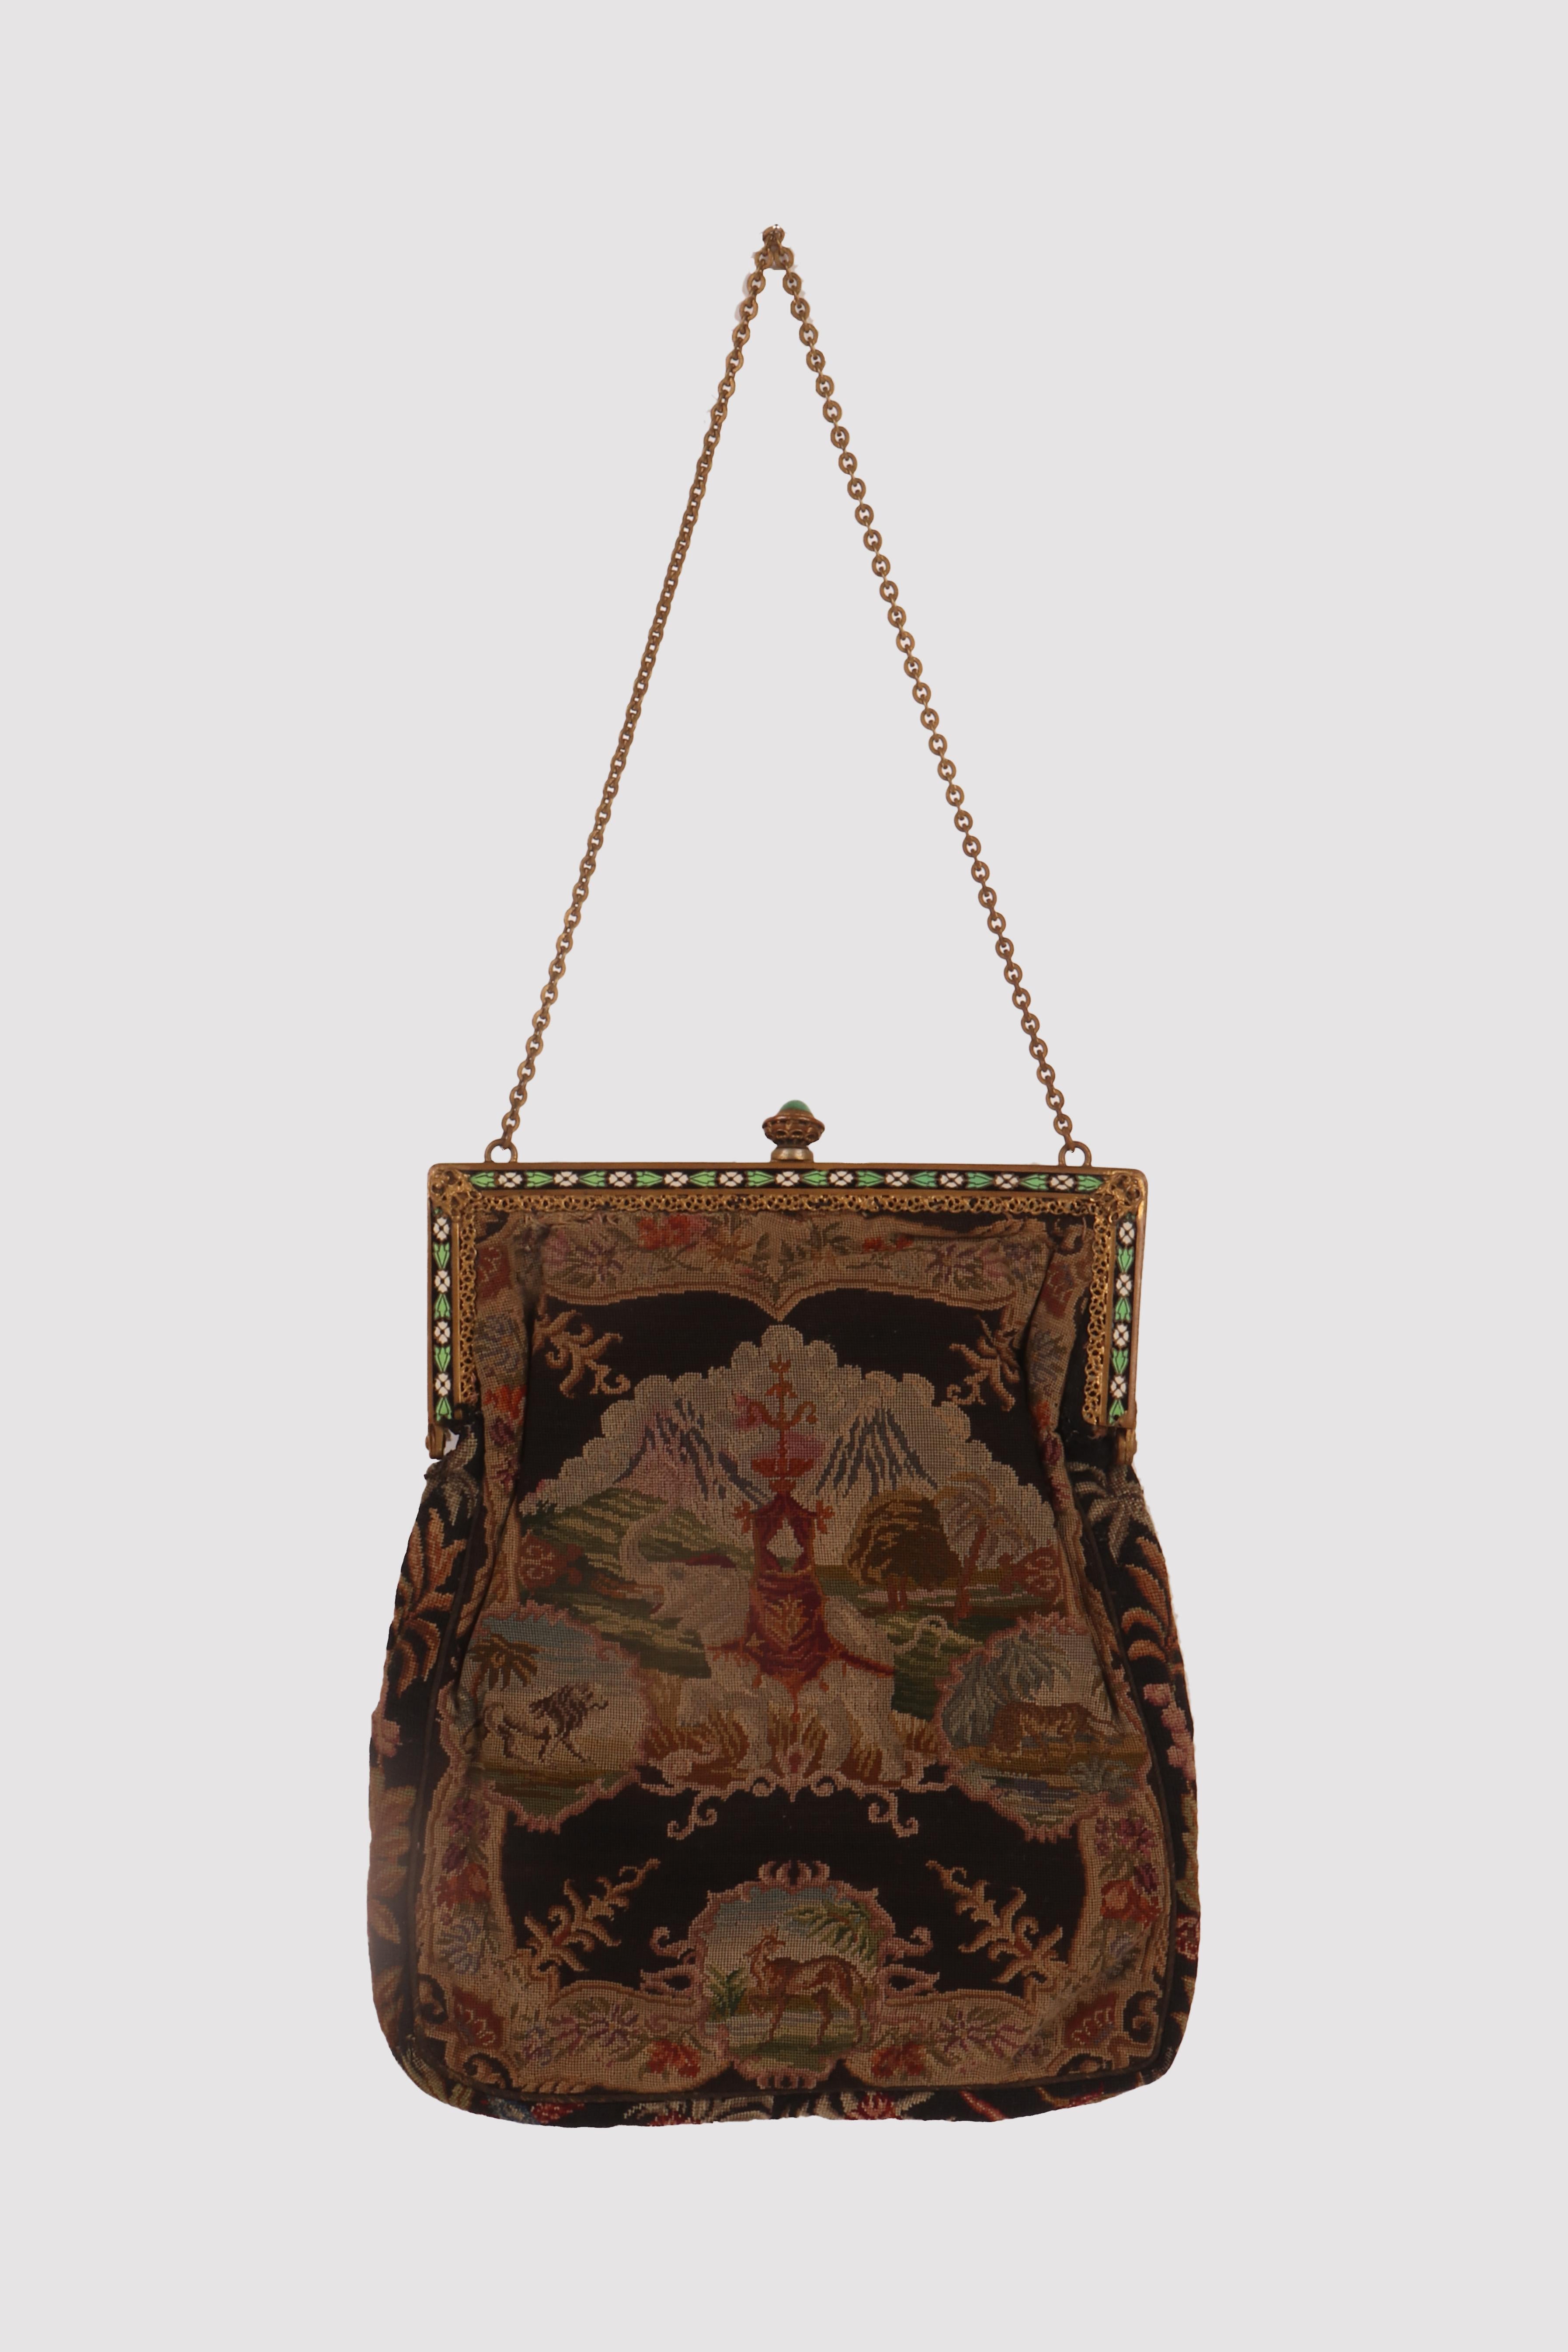 Lady's arm bag with chain and sharp corner zip in golden brass. The hinge features a cloisonneé enamel decoration with stylized green and white flowers on a black background, adorned with openwork motifs and corners. At the corners small synthetic